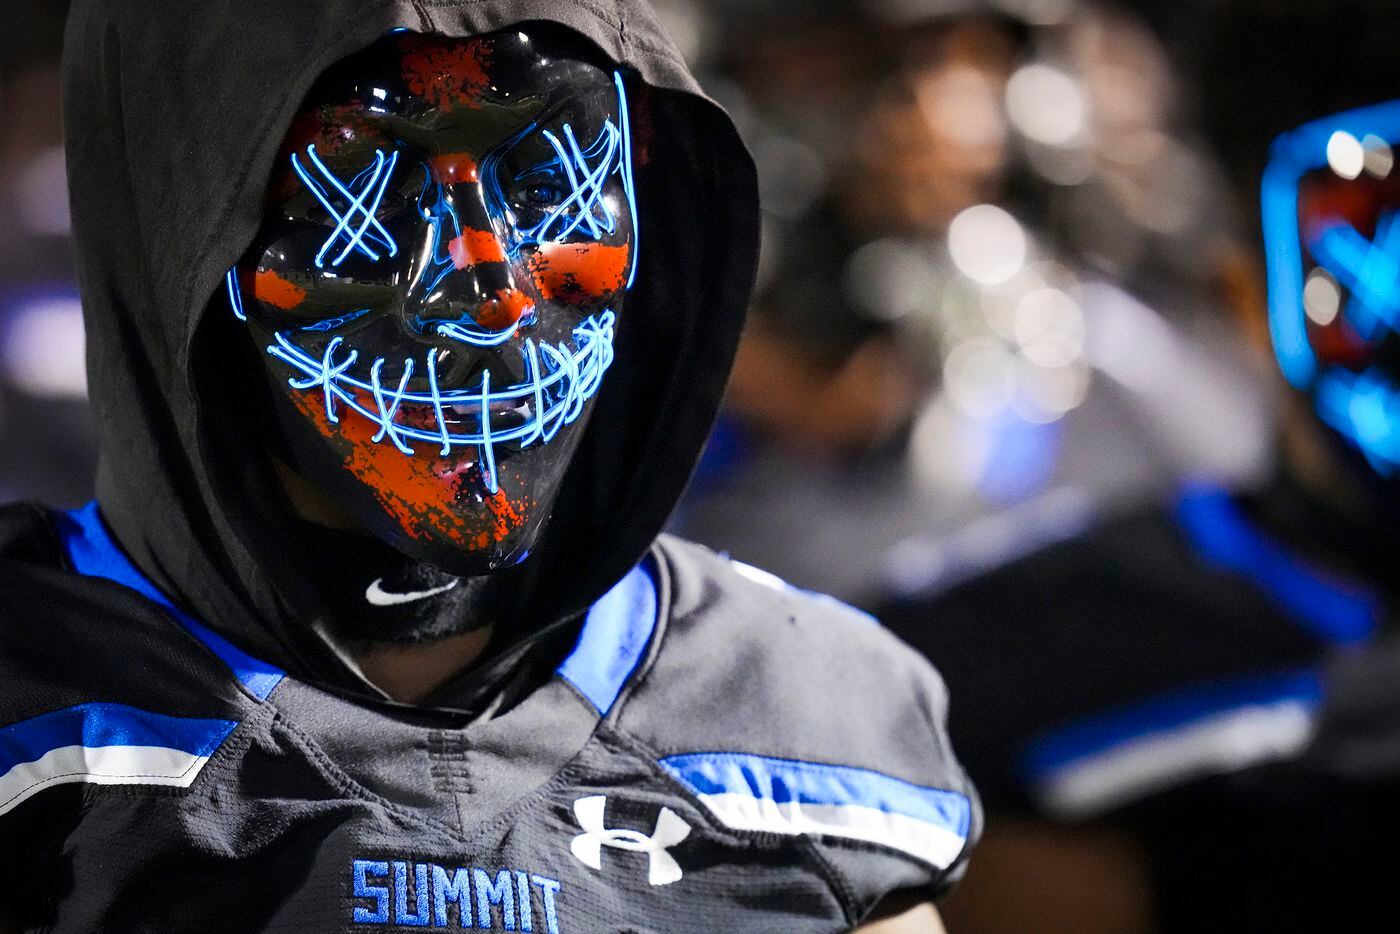 Mansfield Summit defensive back Tavare Smith Jr. (9) wears a face mask as he prepares to take the field for the first half of the Class 5A Division I Region I final against Colleyville Heritage on Friday, Dec. 3, 2021, in North Richland Hills, Texas. (Smiley N. Pool/The Dallas Morning News)